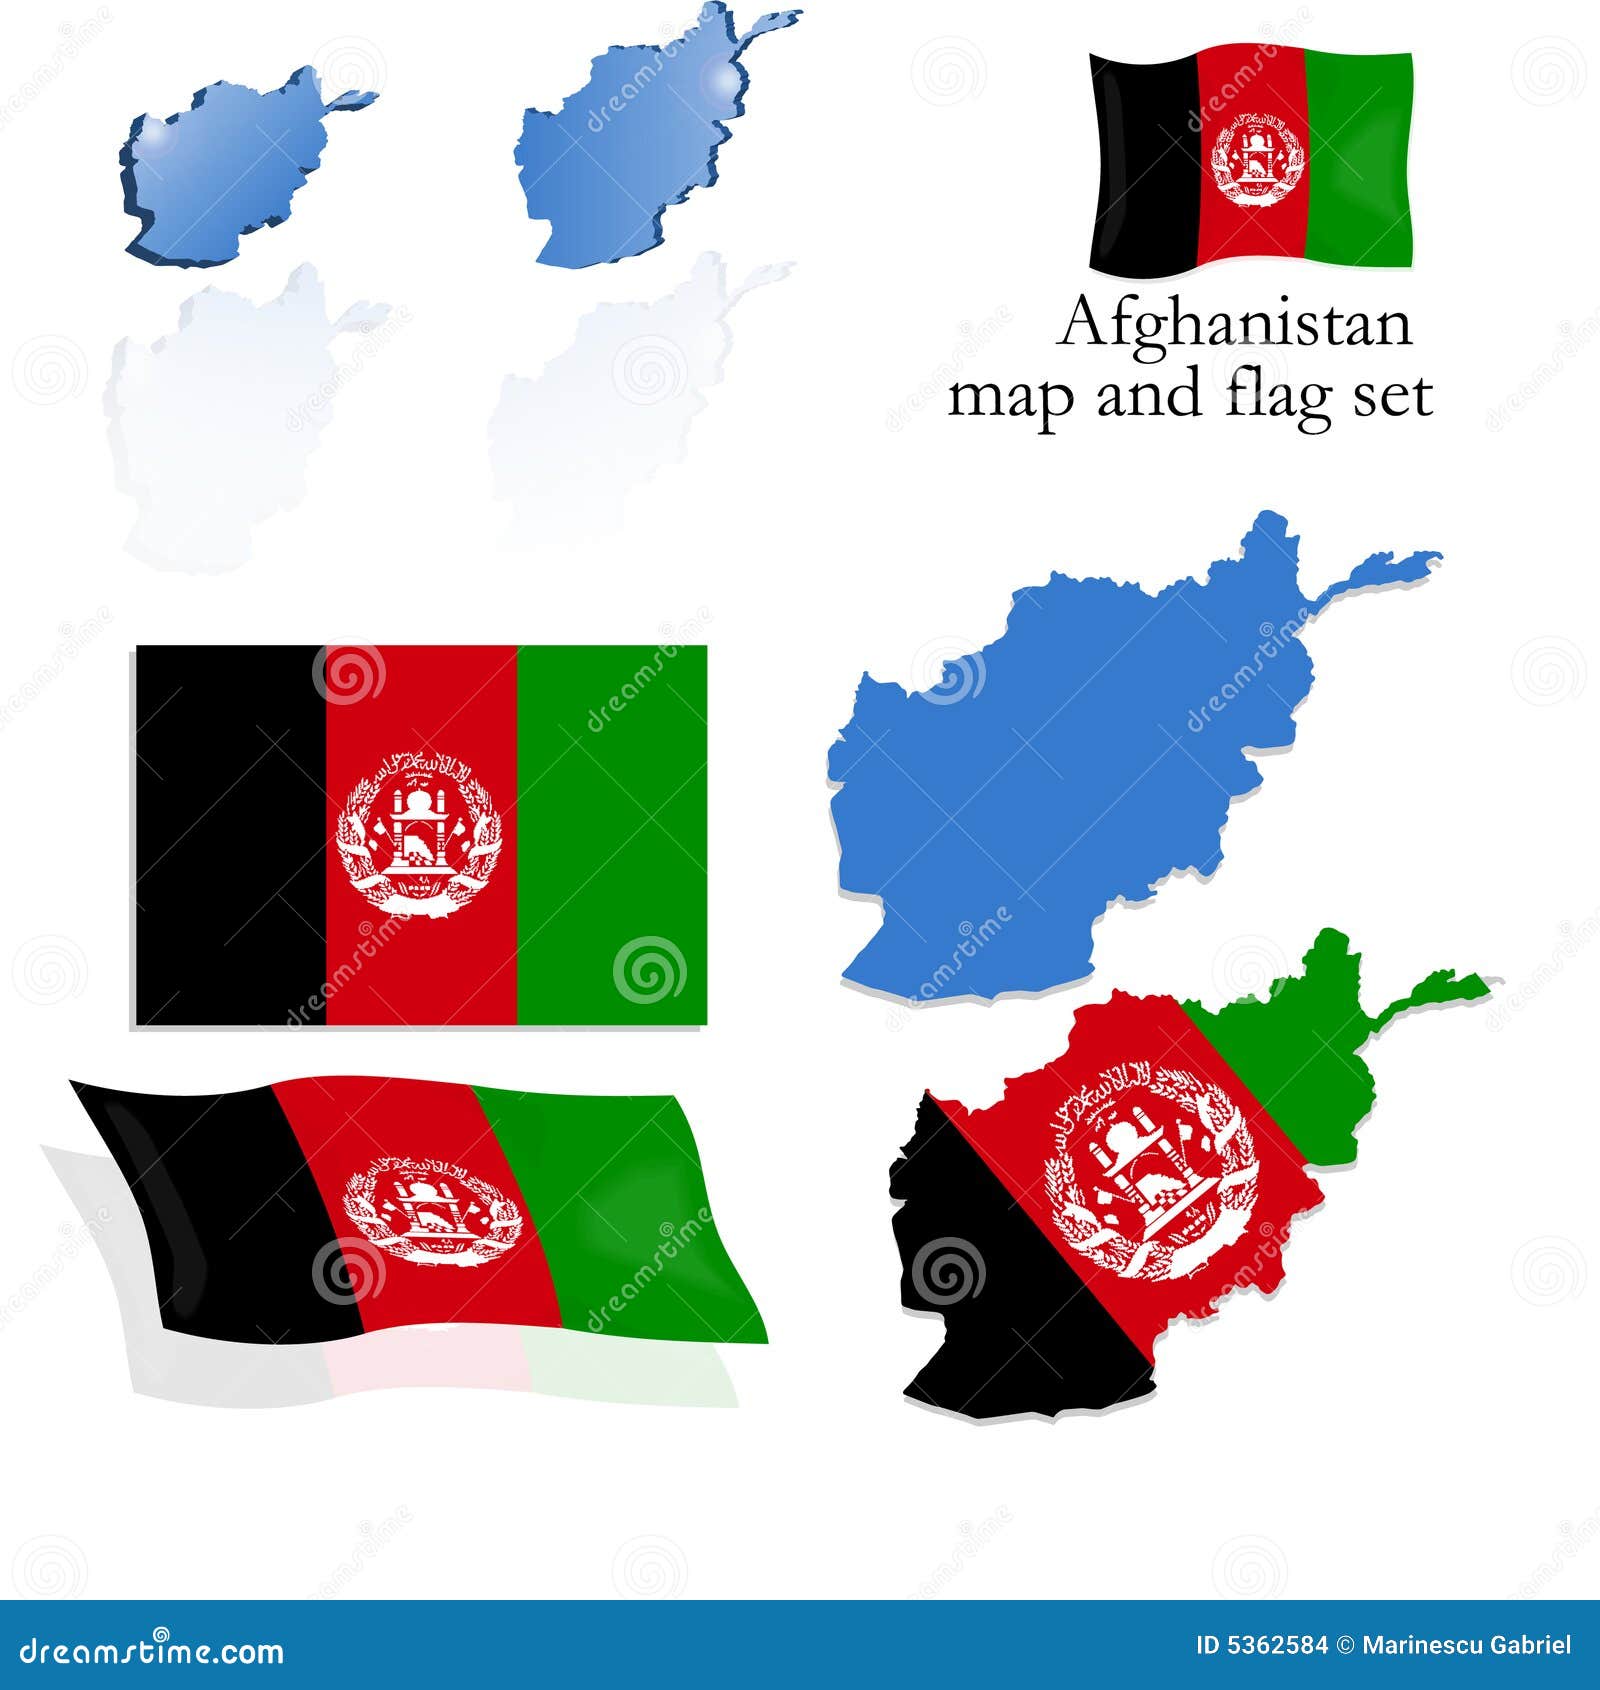 clipart afghanistan map - photo #38